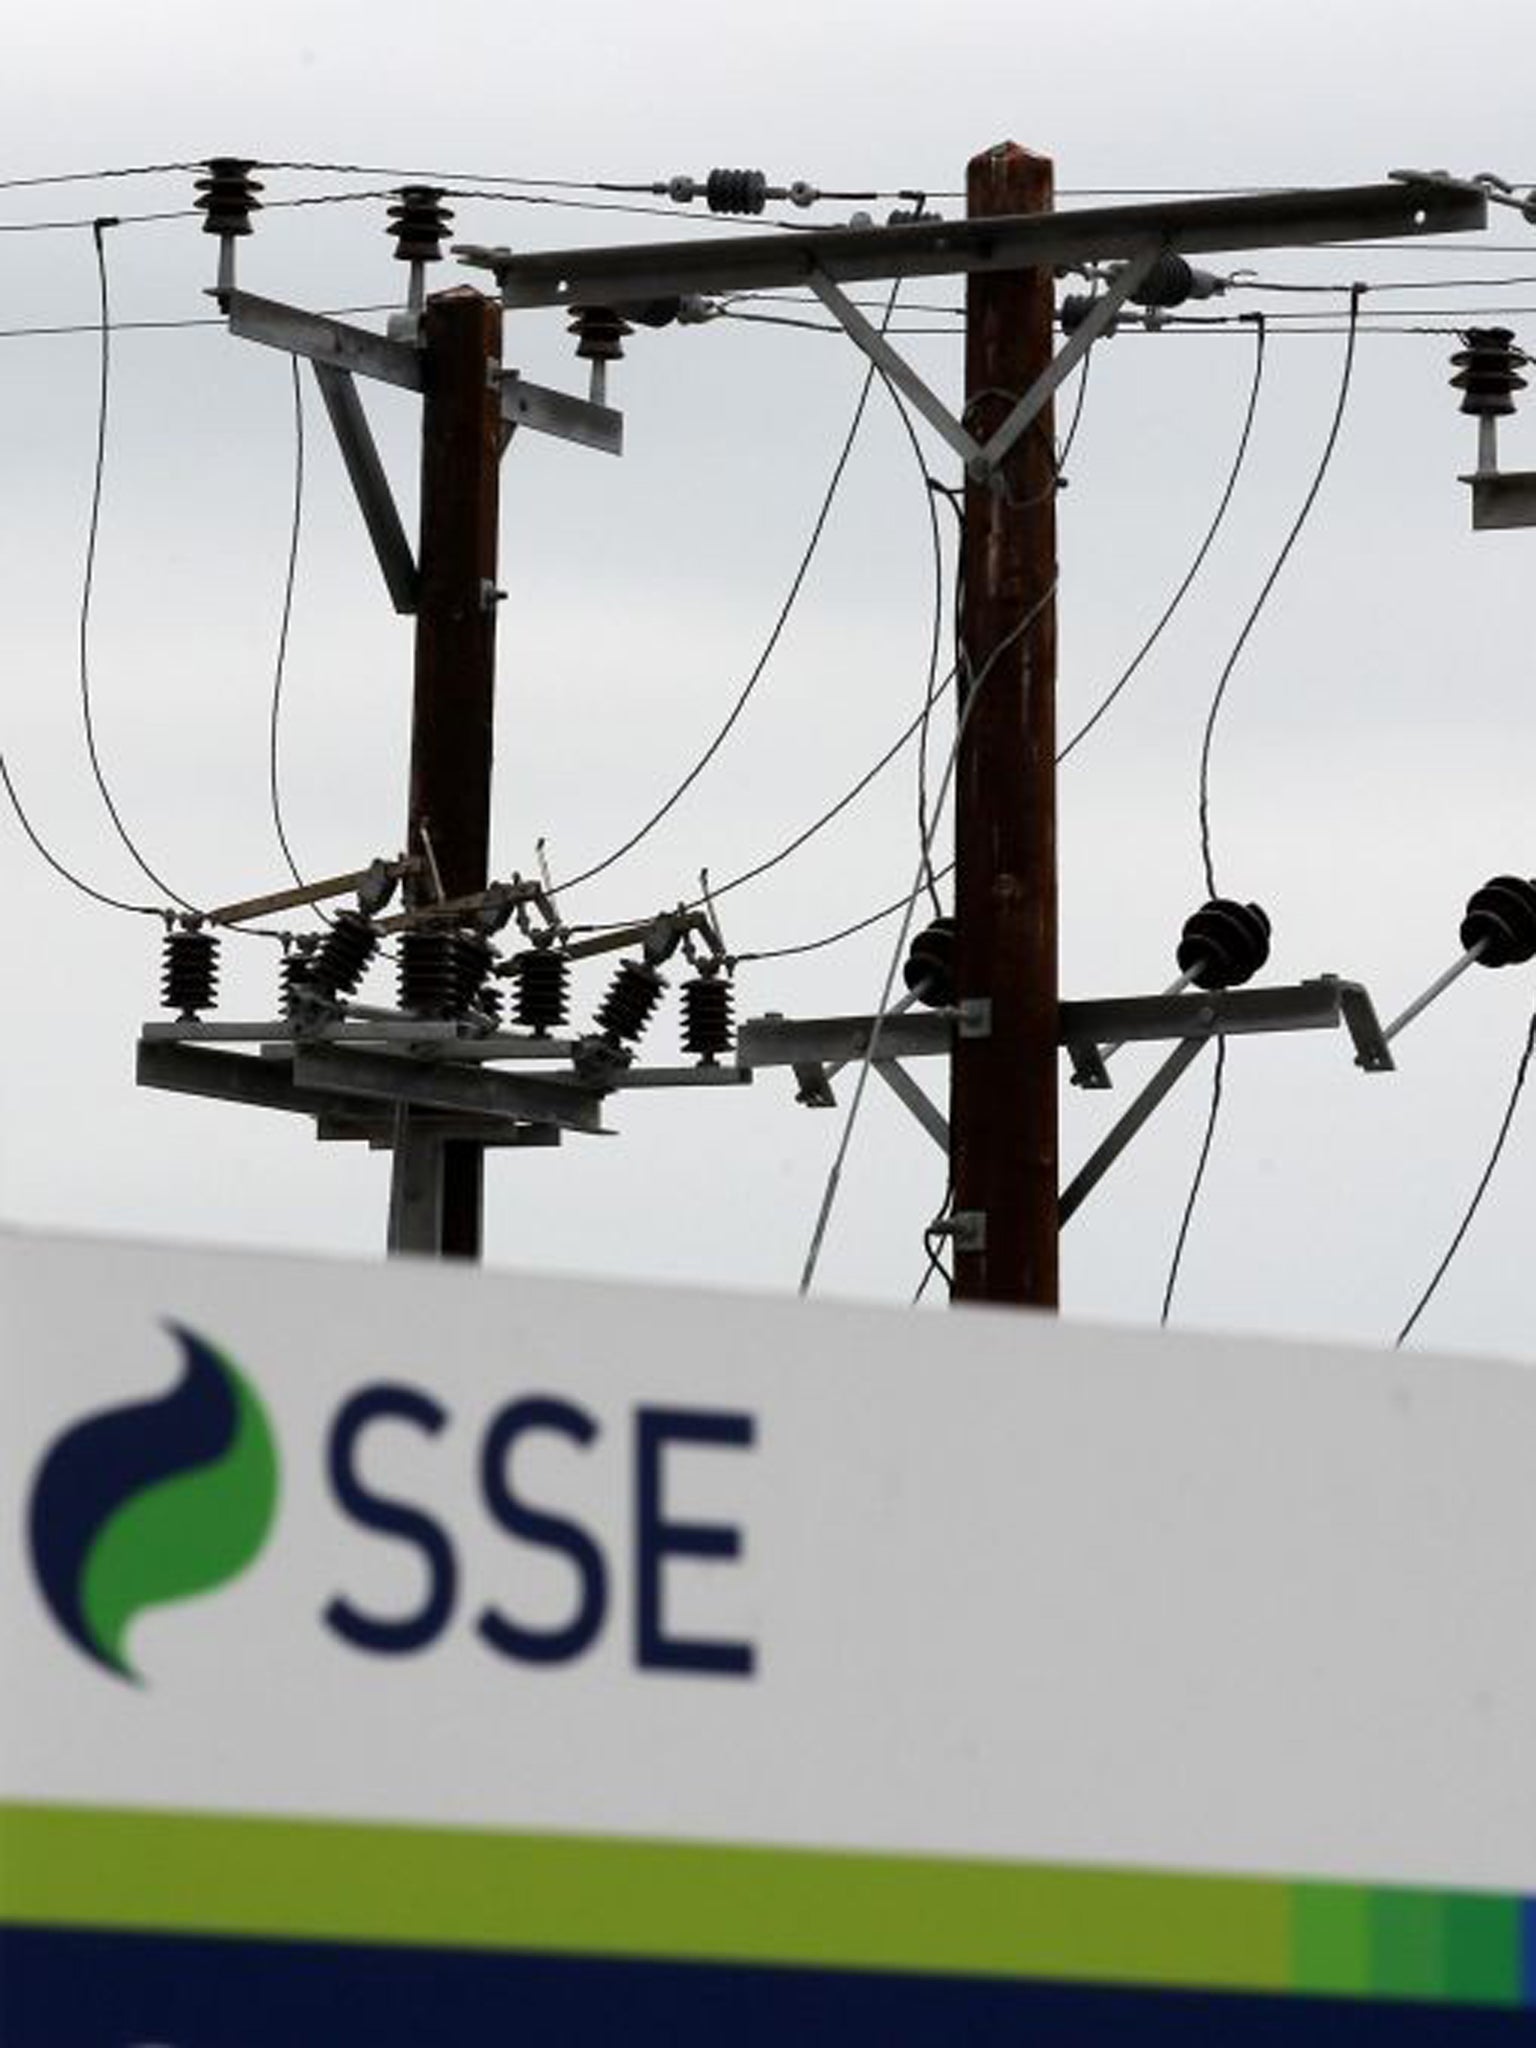 Utility giant SSE is increasing gas and electricity prices by an average of 8.2%